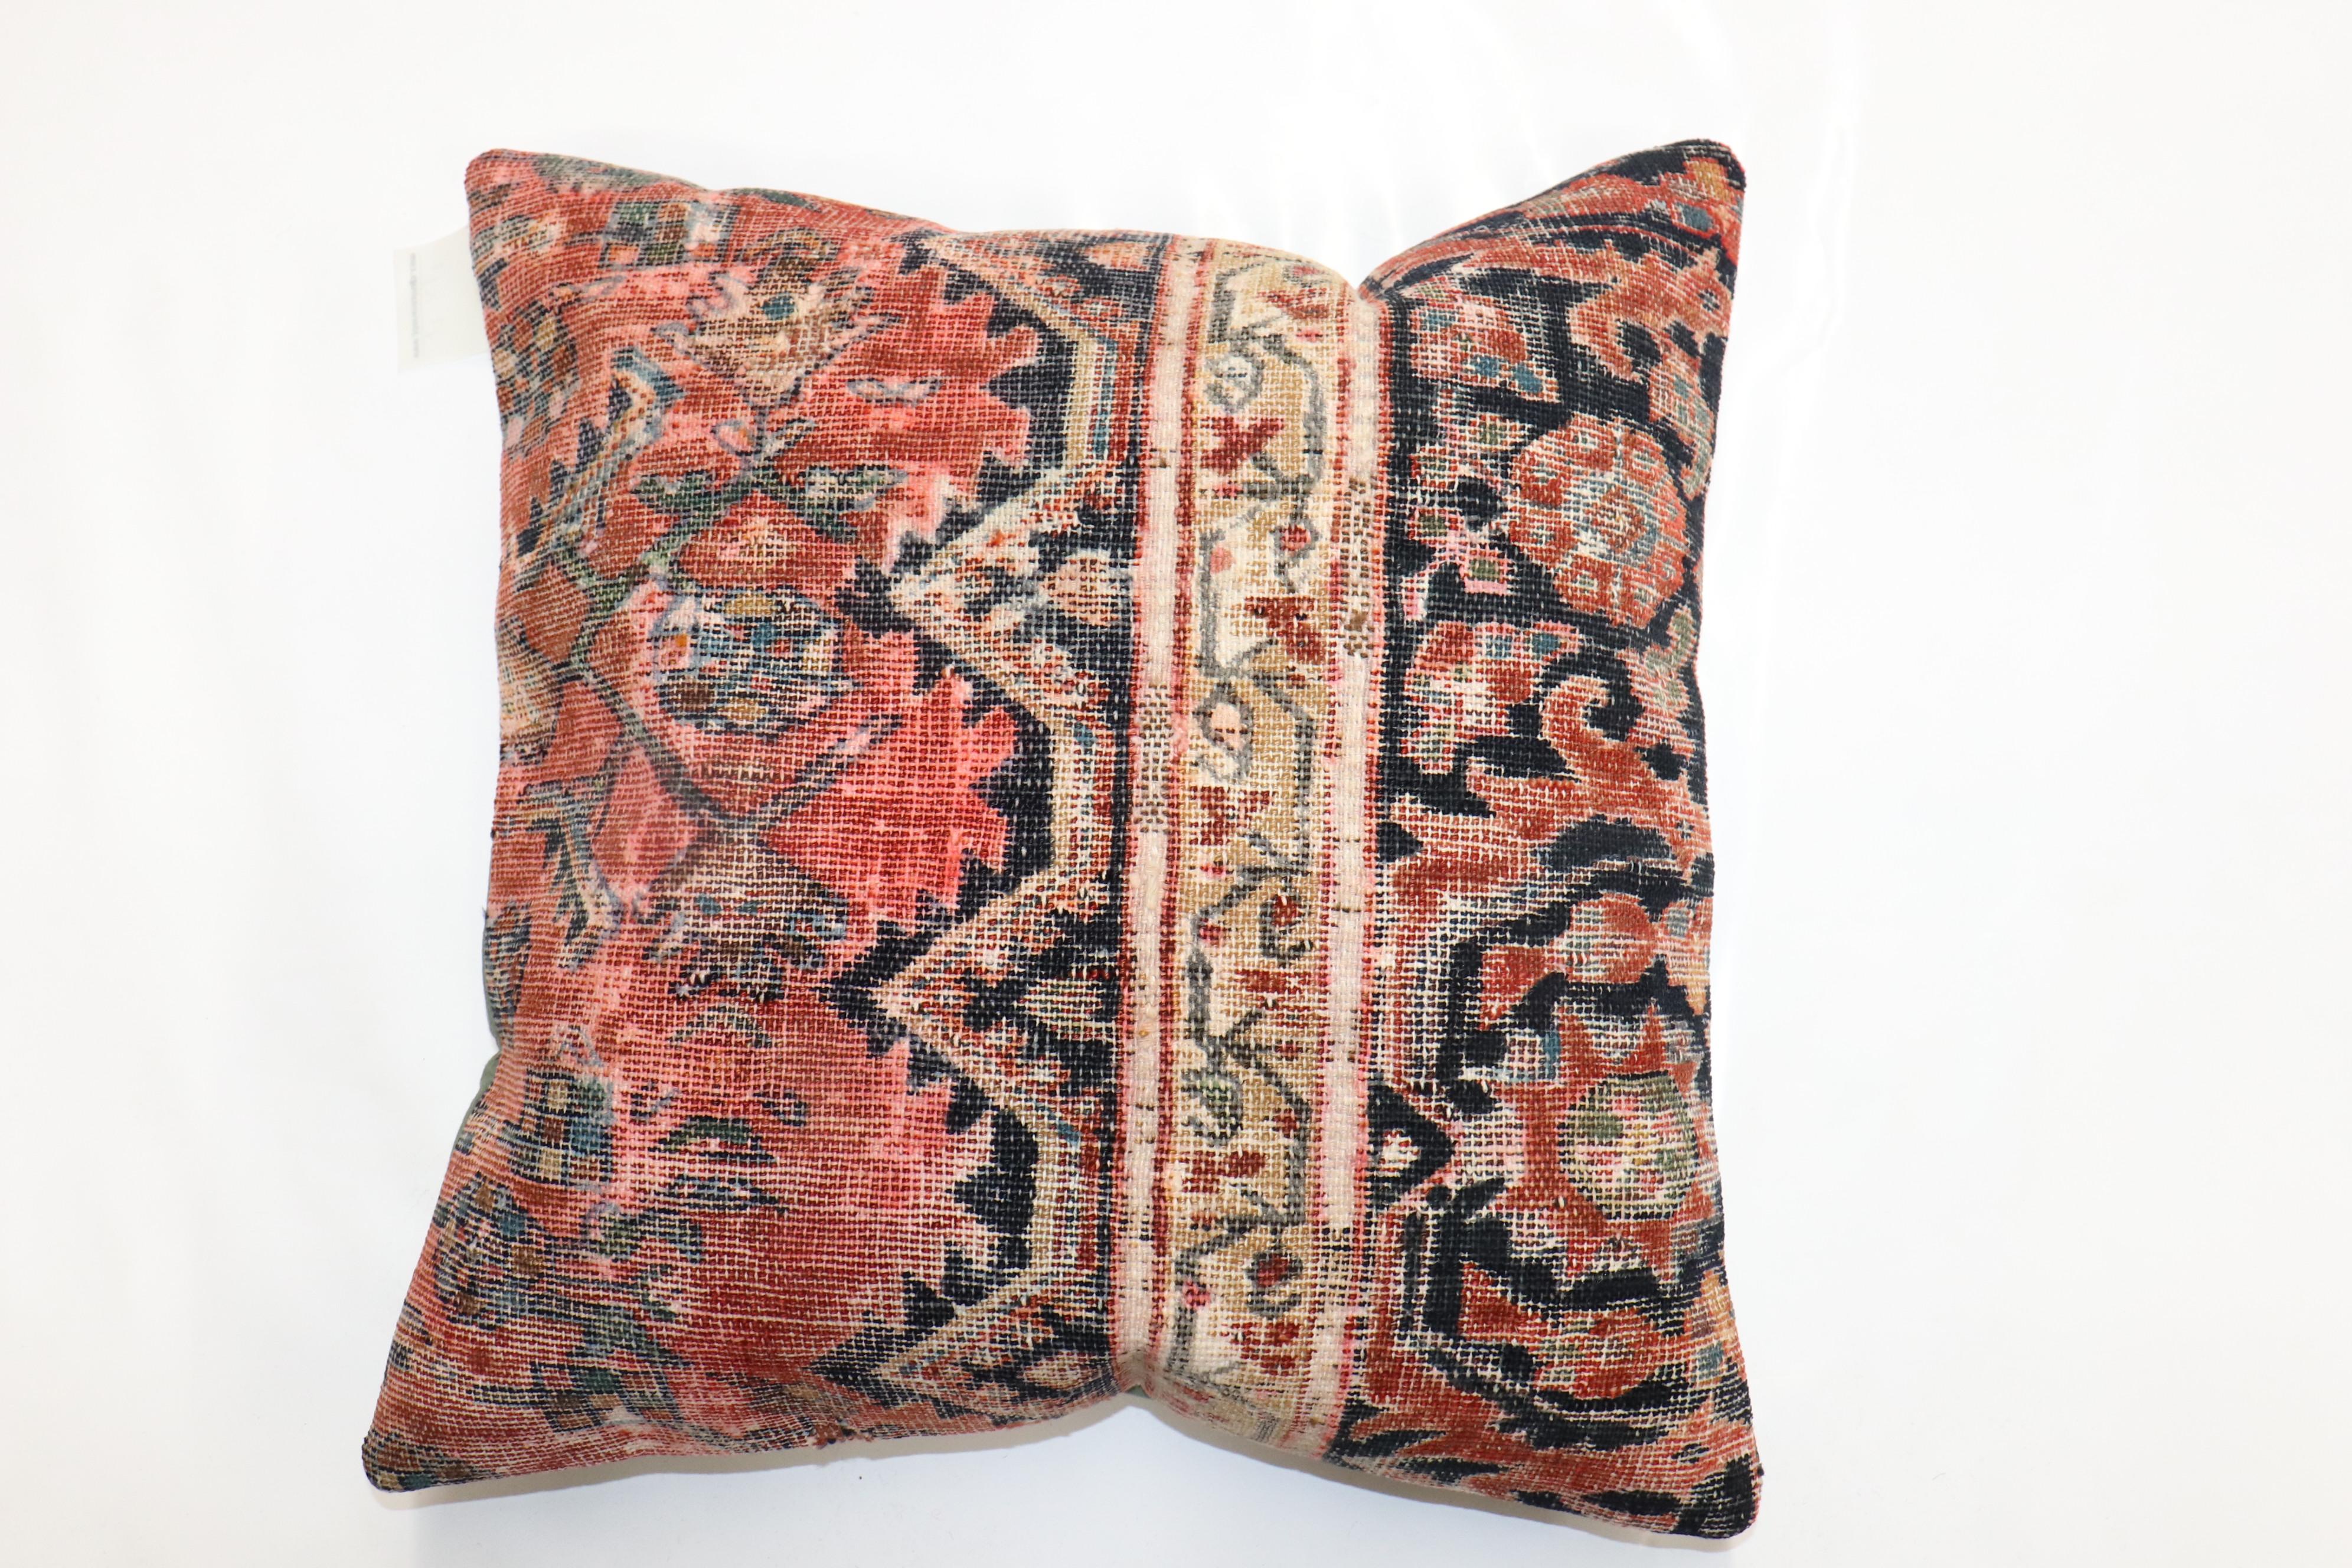 Pillow made from a 19th century distressed Persian rug in 

Measures: 19